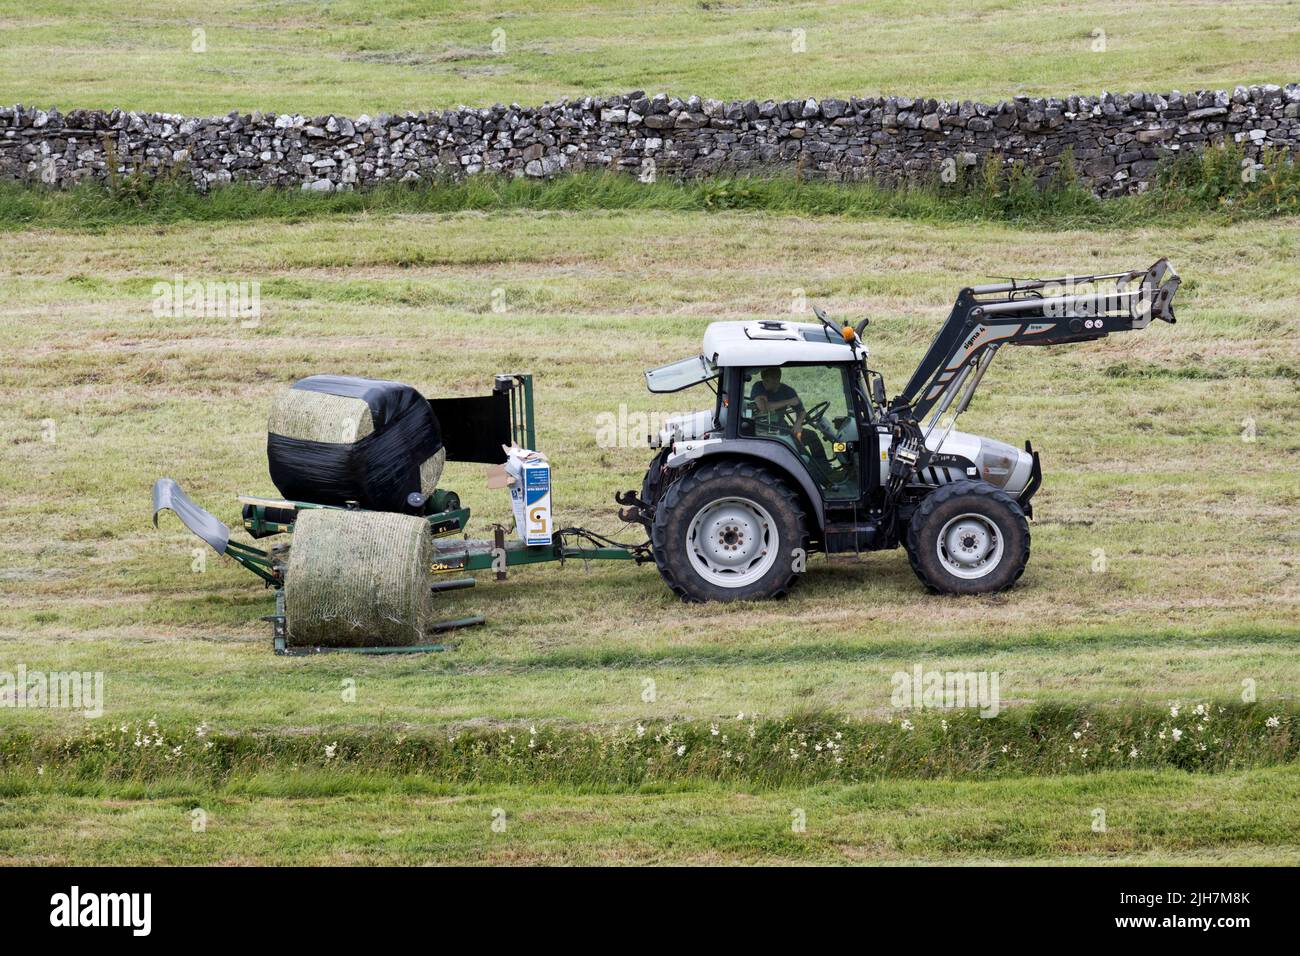 Summer haymaking, Hawes, Wensleydale, North Yorkshire. Round bales are wrapped with plastic to exclude air to make silage or haylage for winter feed. Stock Photo